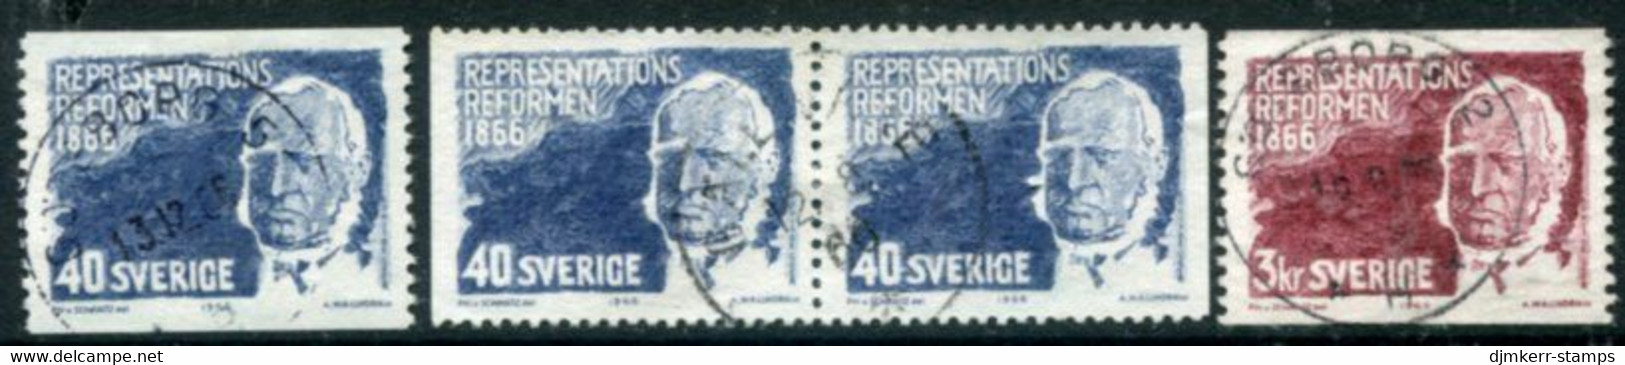 SWEDEN 1966 Centenary Of Constitutional Reform Used.  Michel 553-54 - Used Stamps